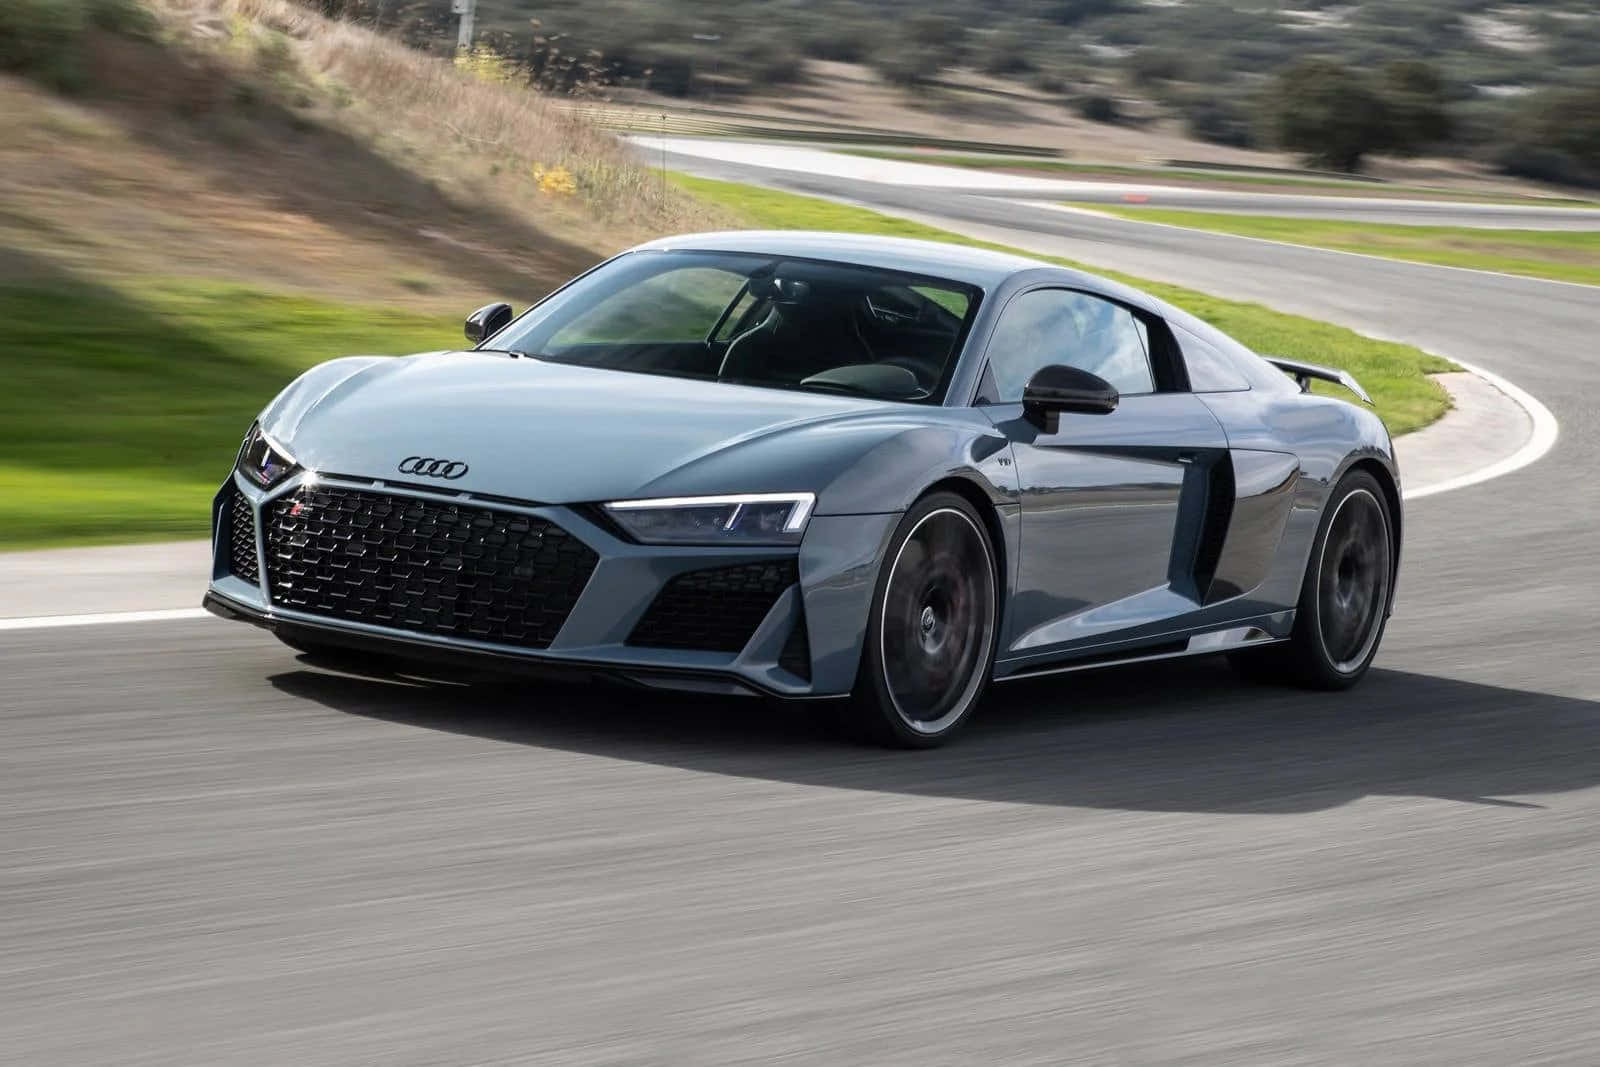 "Experience the Thrill of Driving an Audi R8"